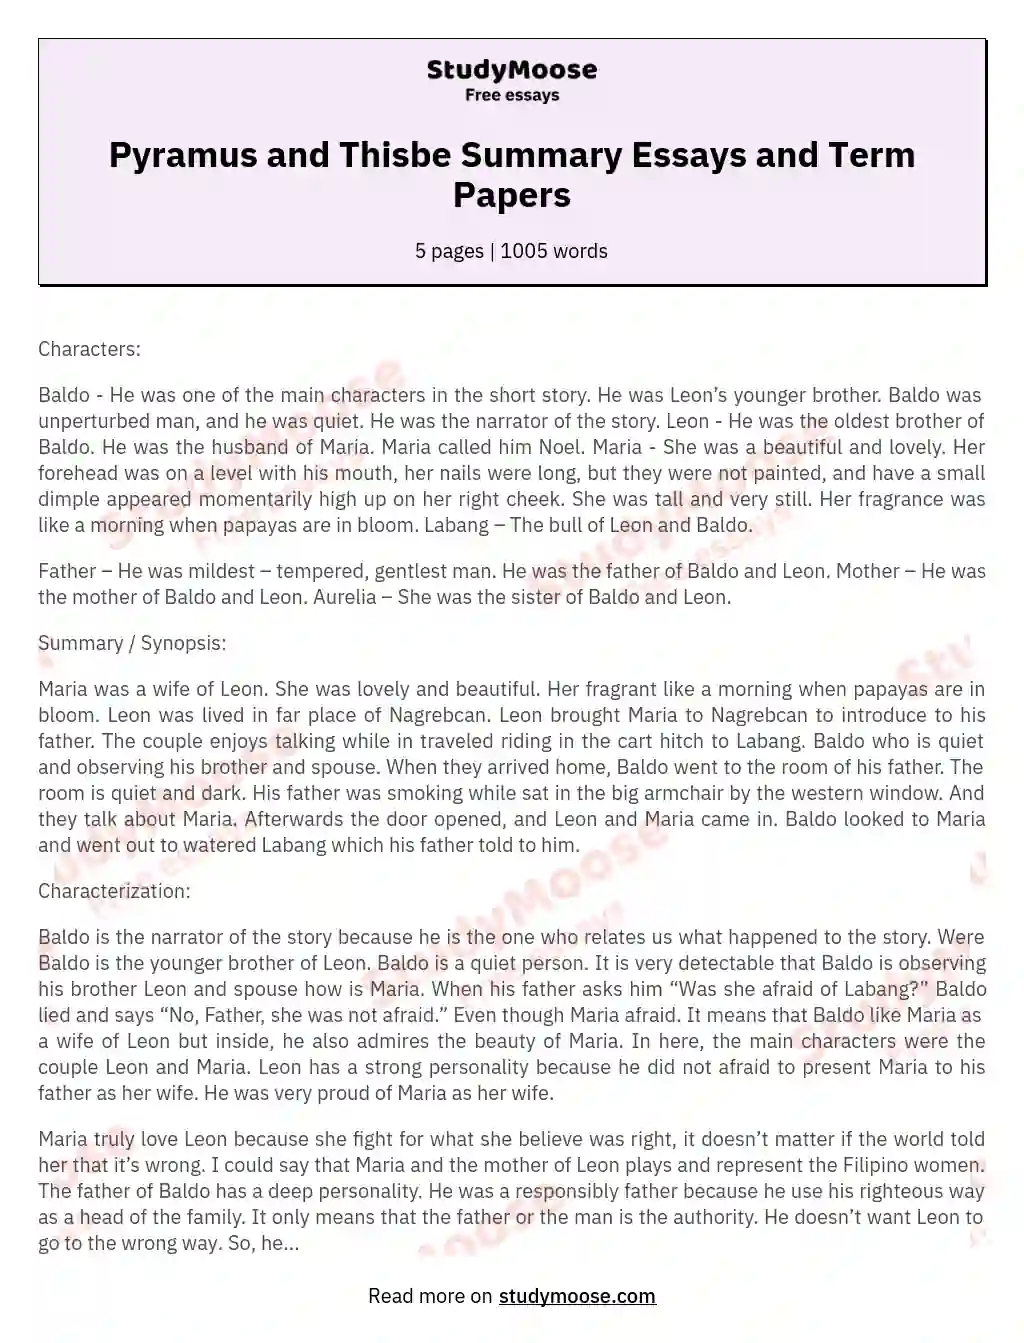 Pyramus and Thisbe Summary Essays and Term Papers essay